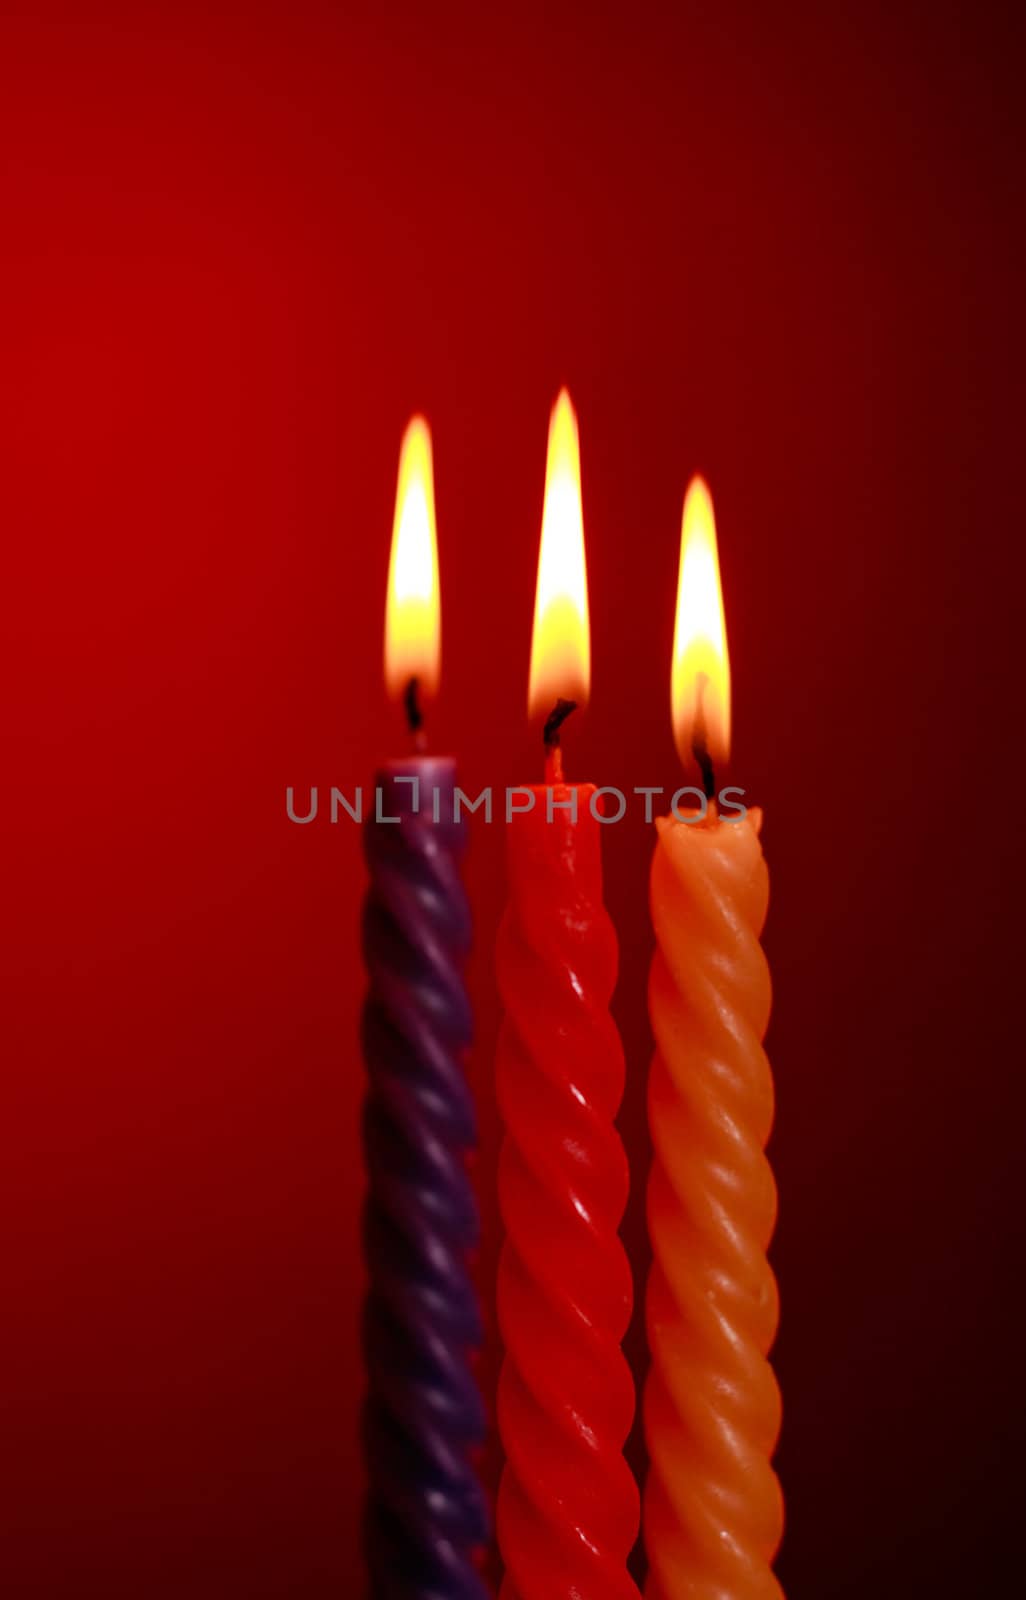 Three Candles On Red by petr_malyshev